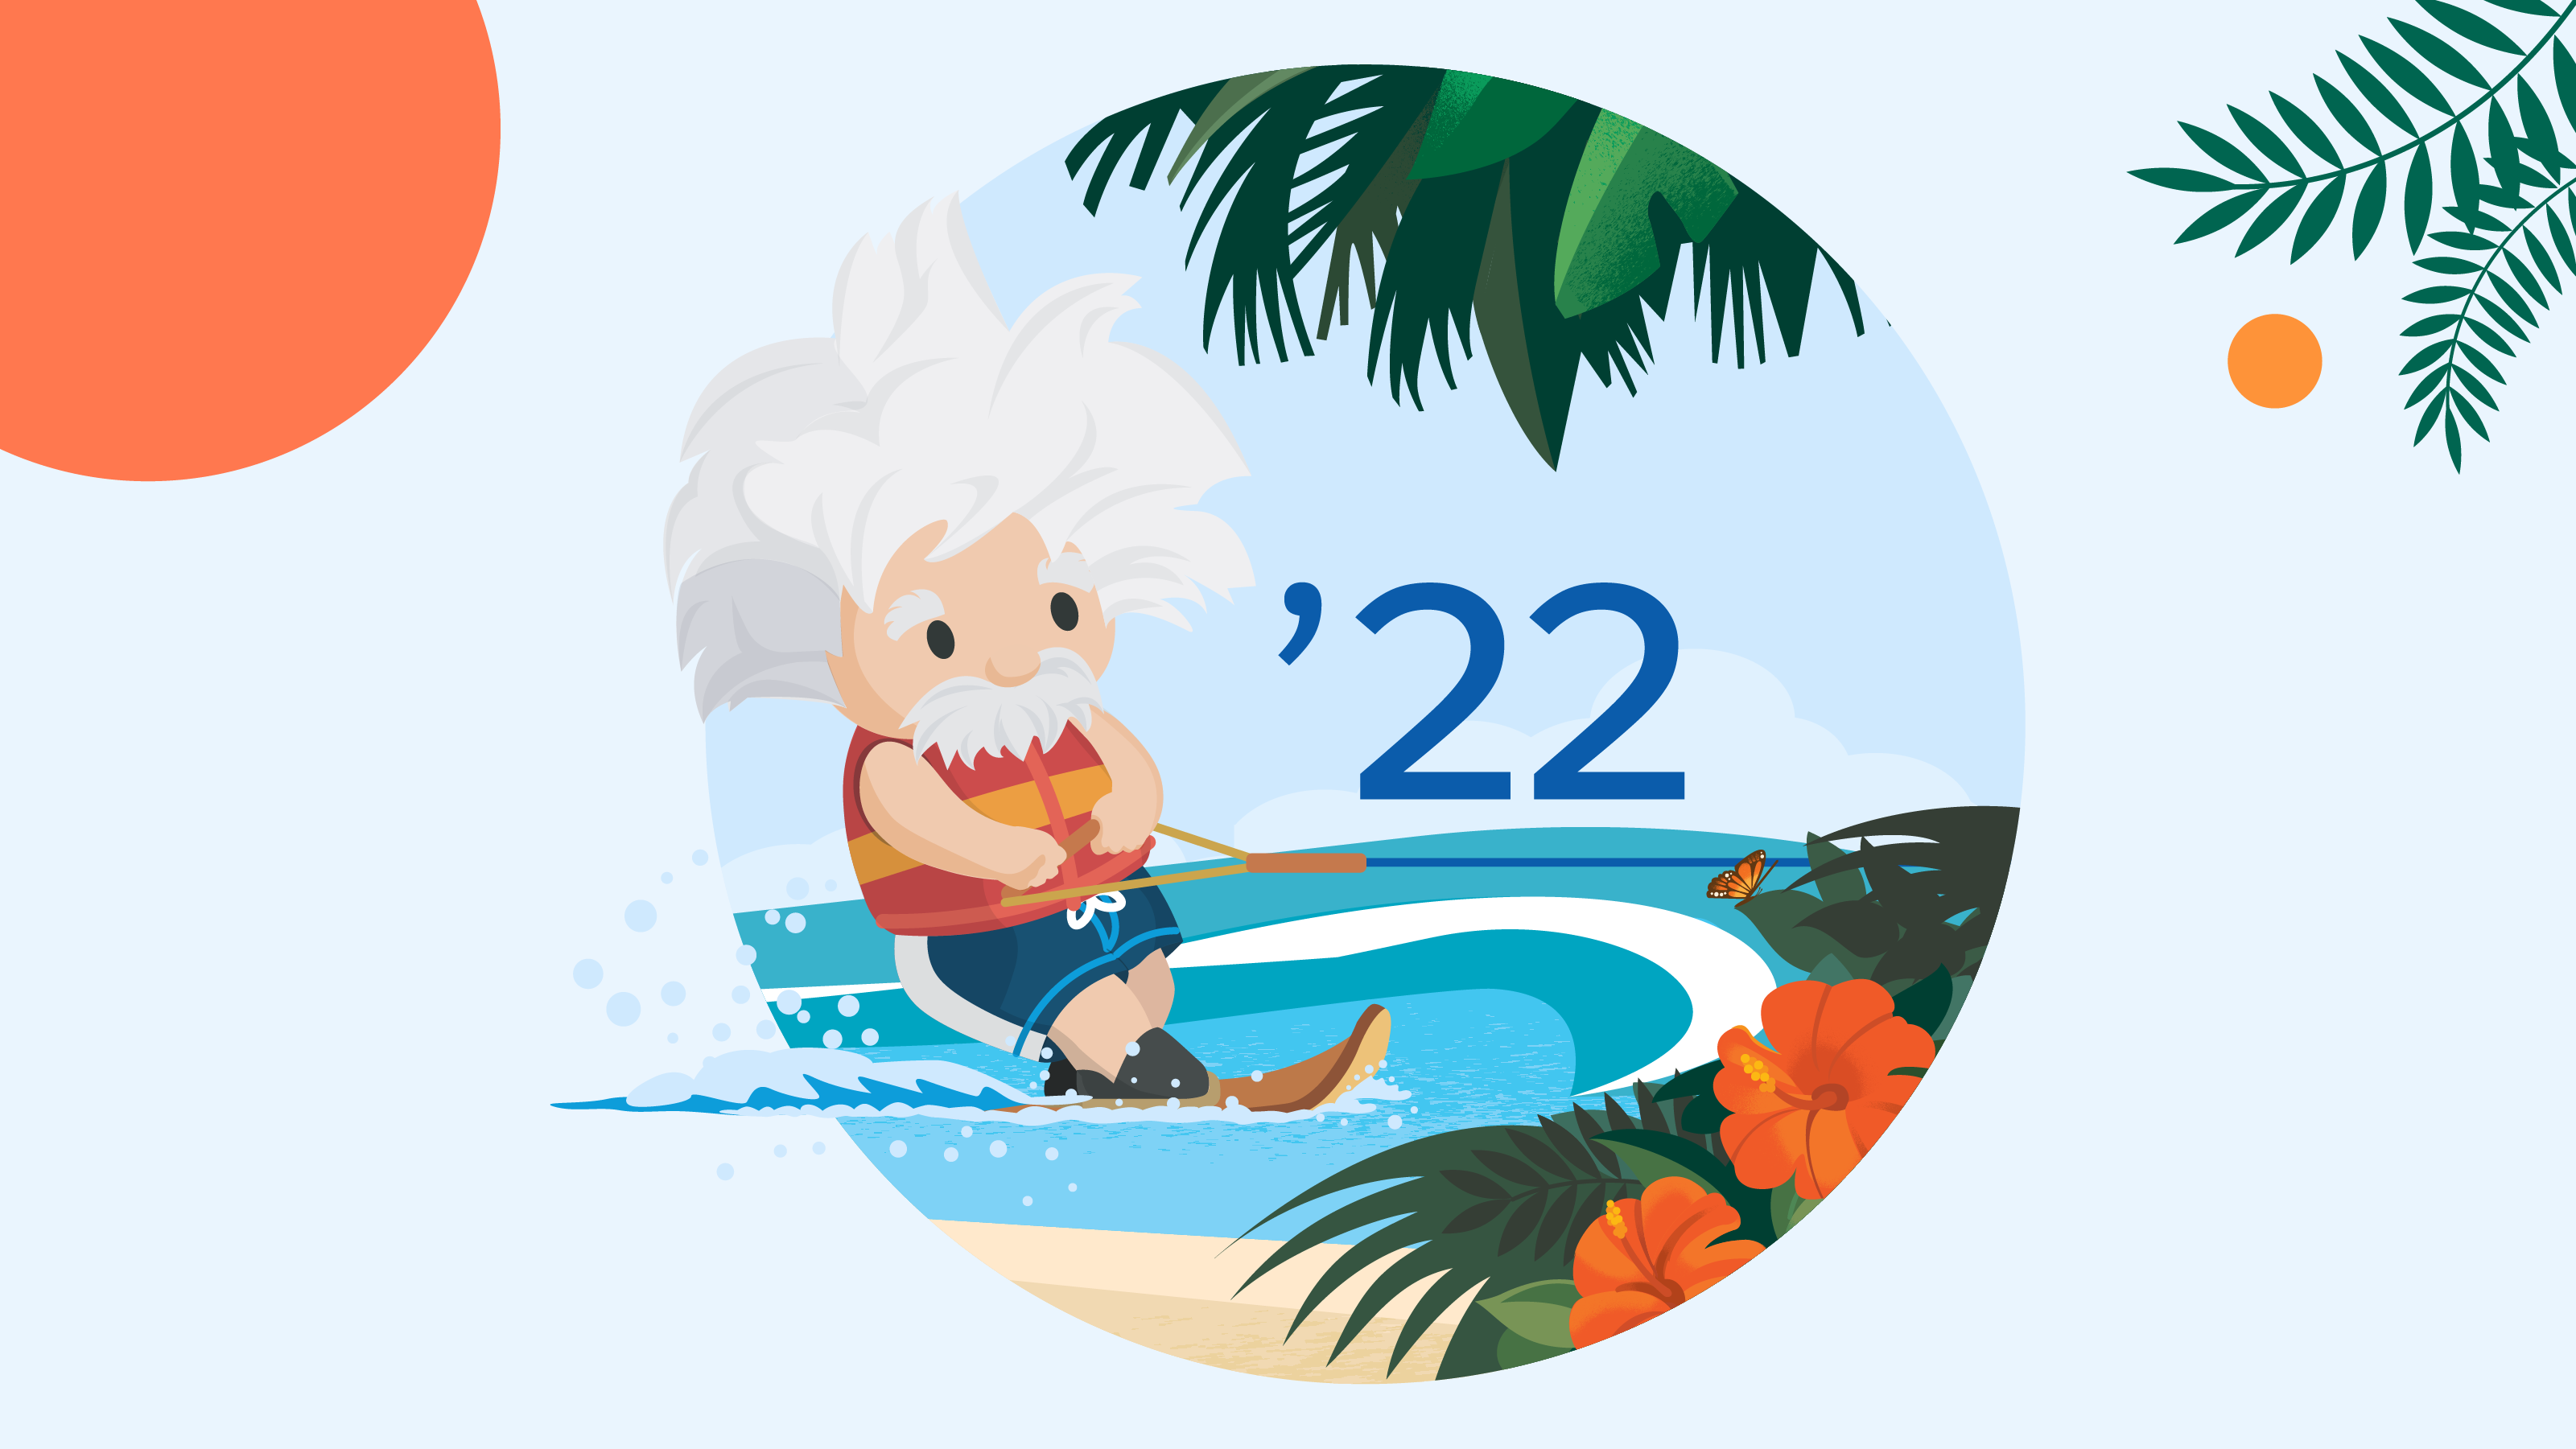 Salesforce Winter ‘23 Release 5 New Features to Preview Now